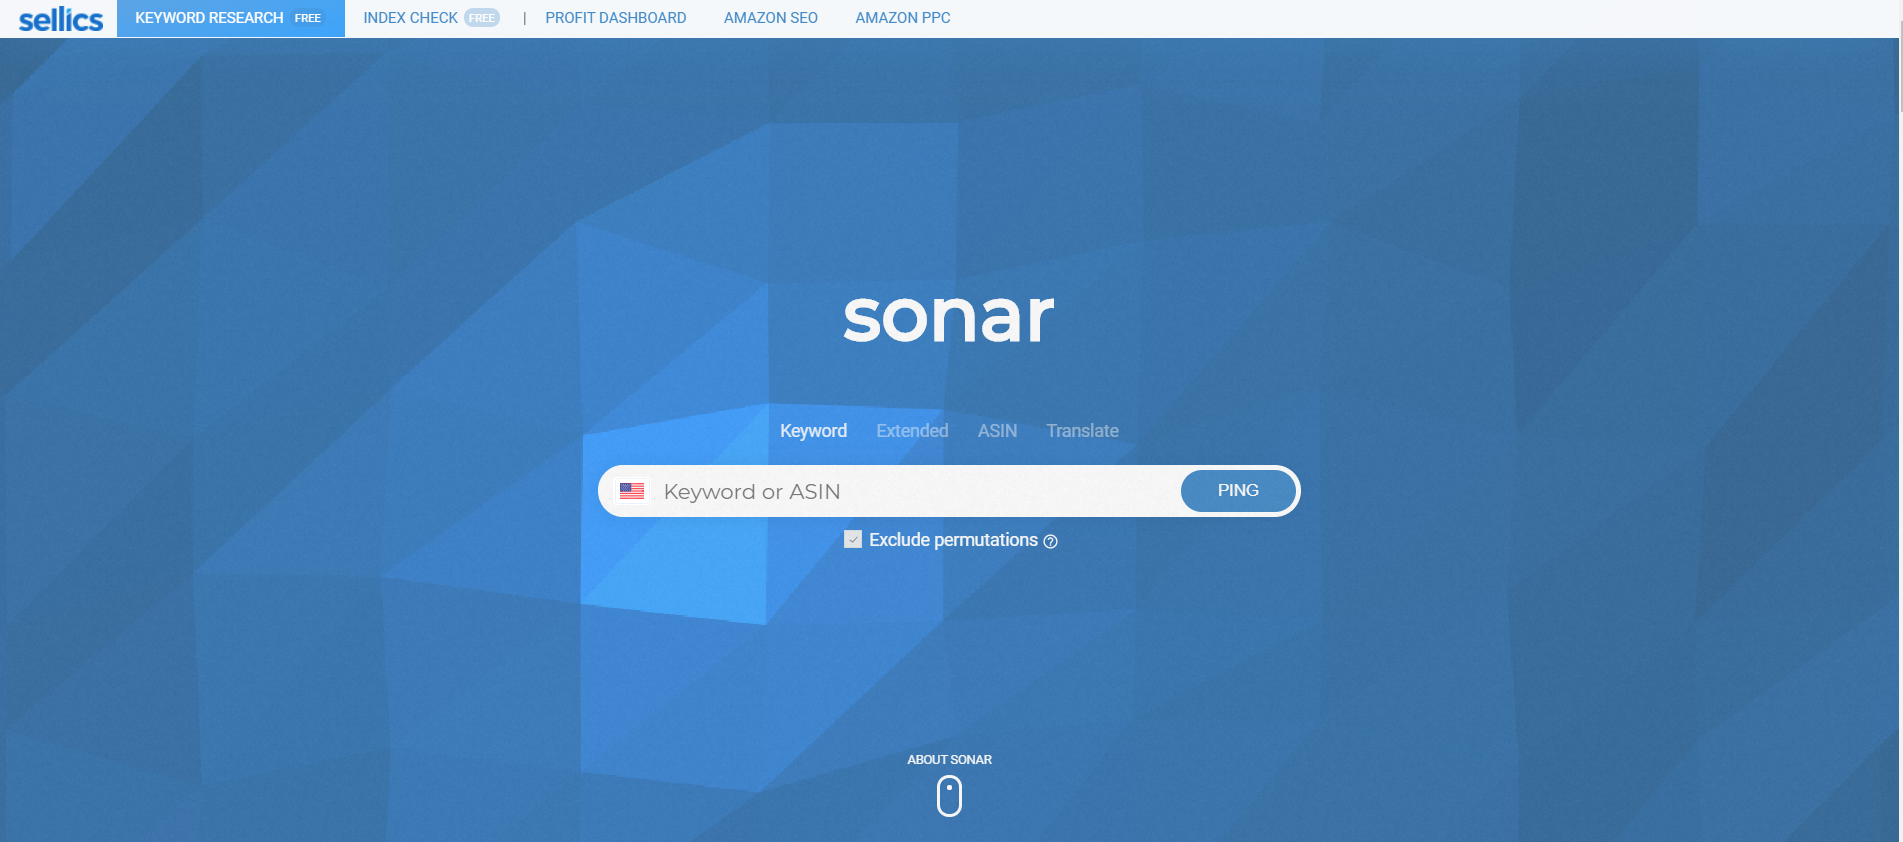 Sonar – Free Amazon Keyword and Product Research Tool